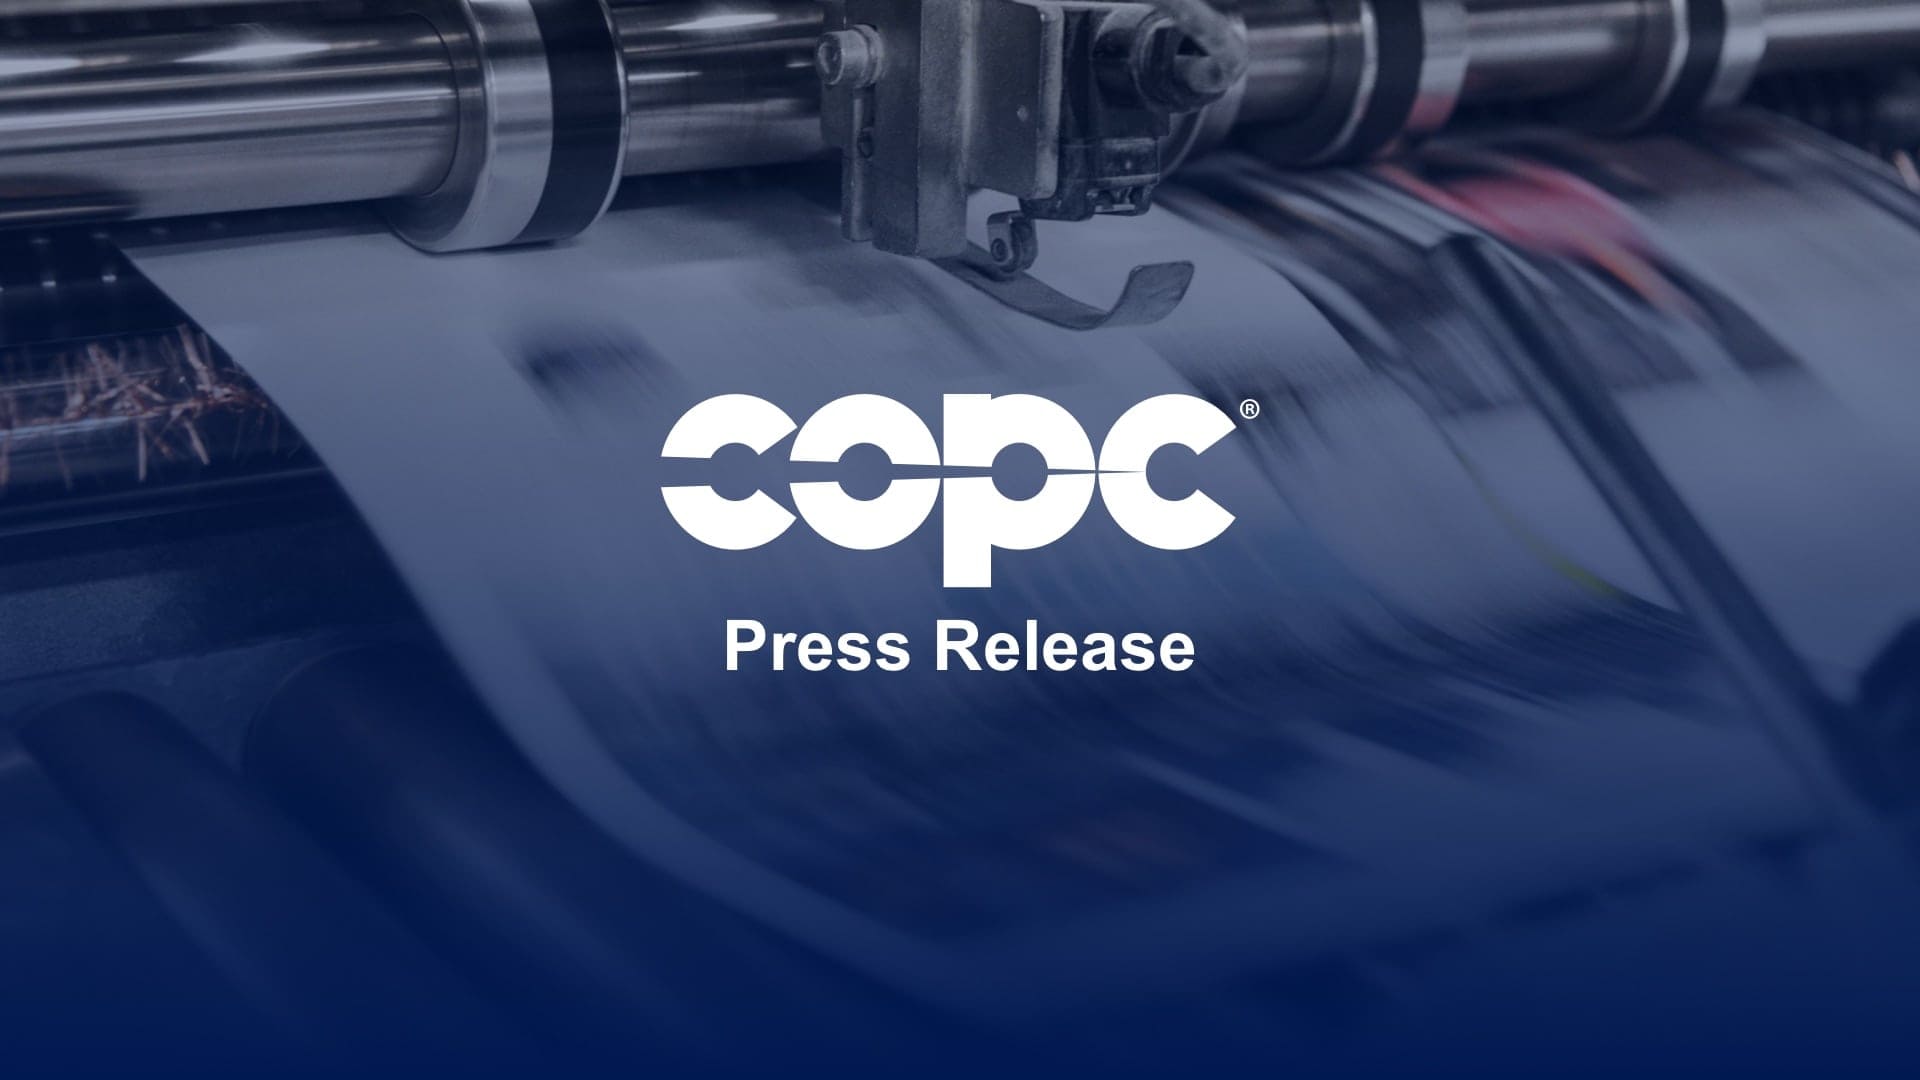 COPC Inc. Announces Approved Technology Provider Program – Unique opportunity for companies to showcase CX capabilities thumbnail Image 